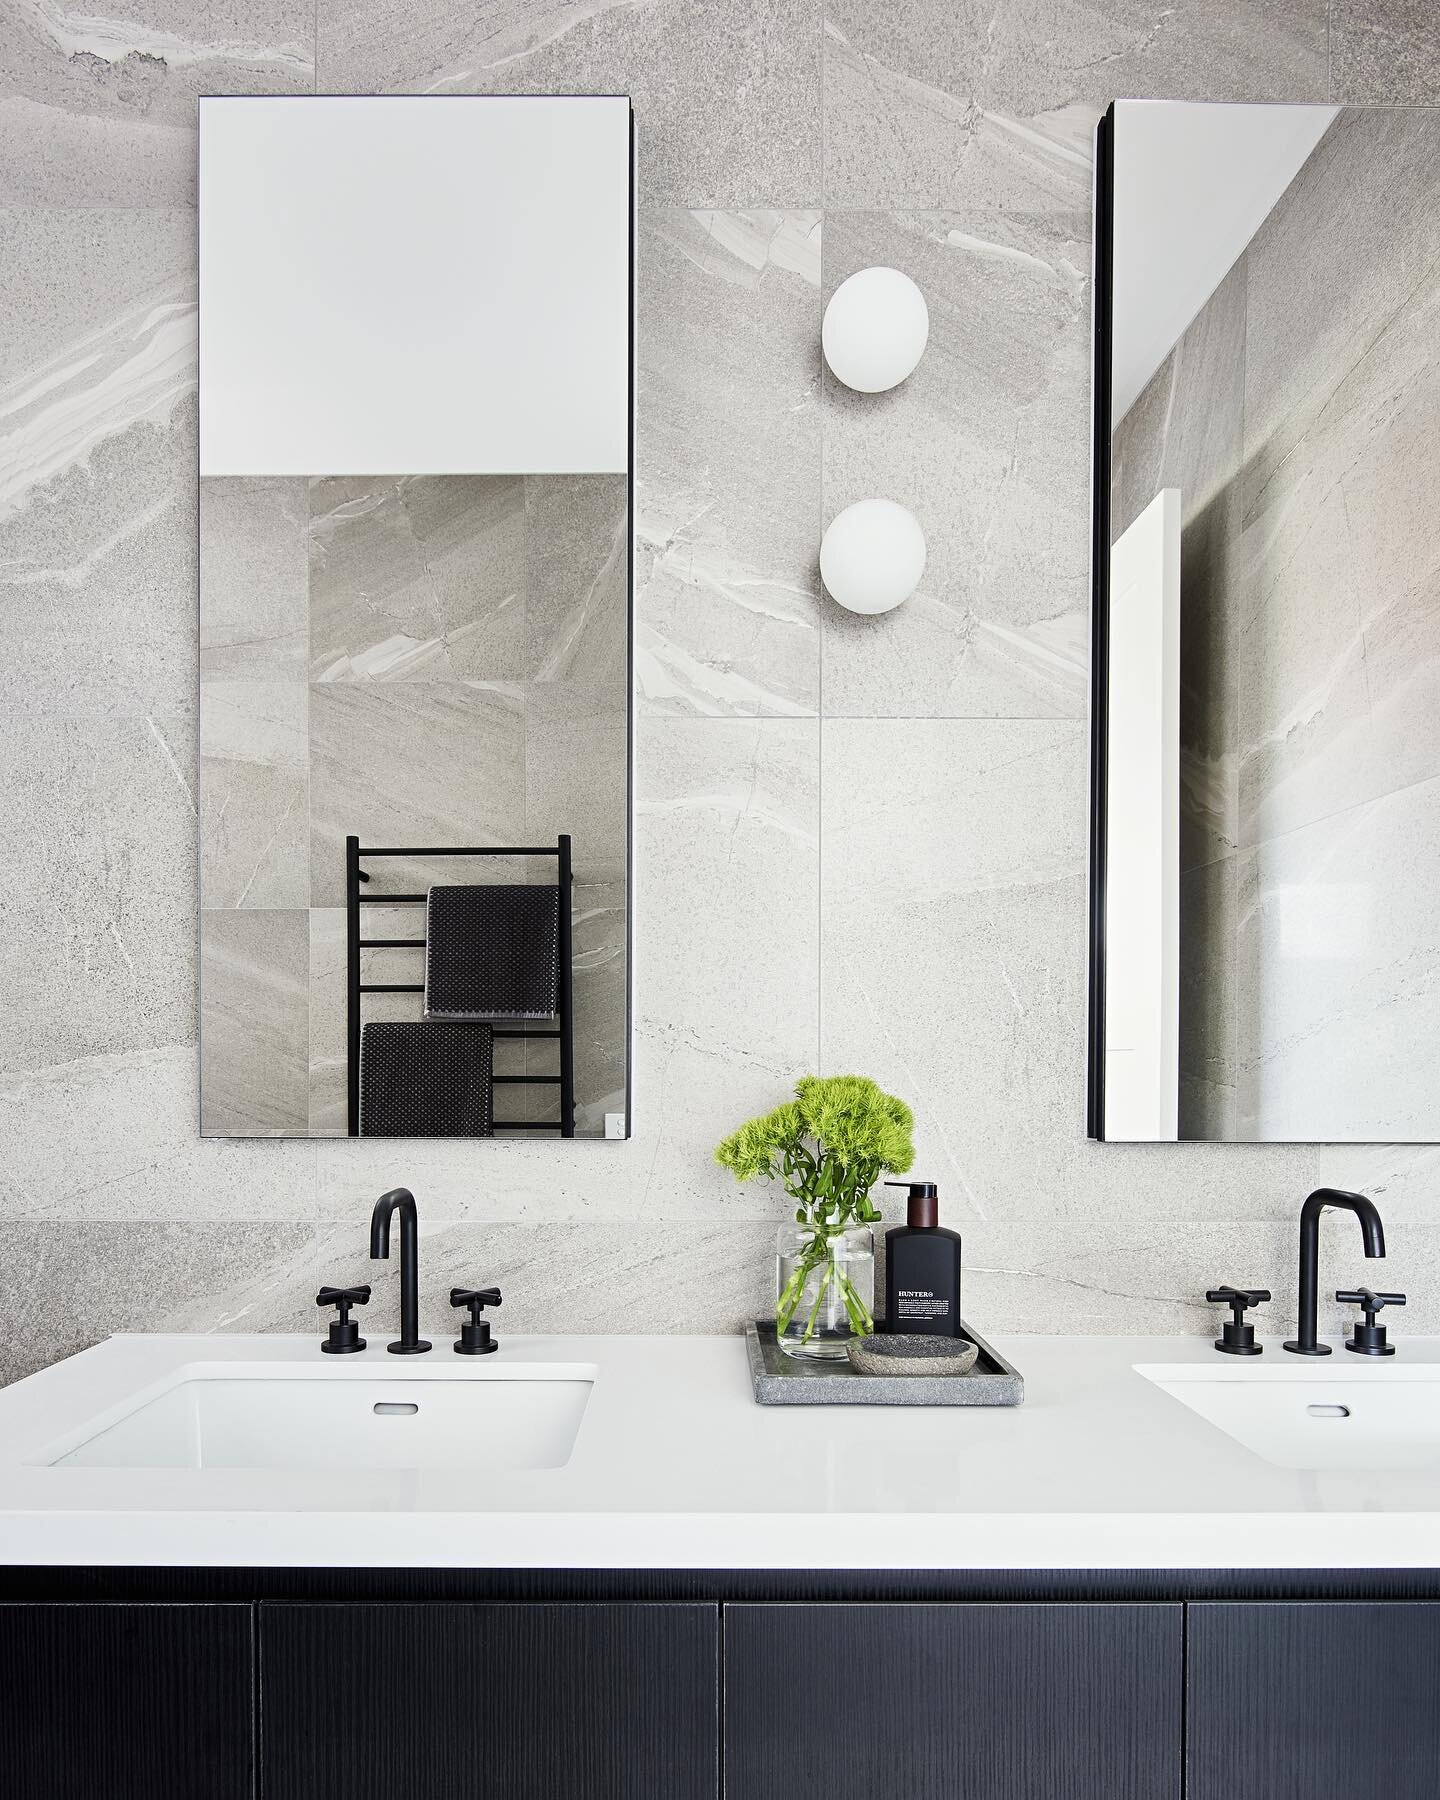 A monochromatic palette instantly creates interest, mood and a clean fresh look. It is both timeless and edgy all at the same time! 

Project: Mitchell St, Northcote

Development @jimtomdevelopments 
Building Design @edgspace 
Interior Design @alters